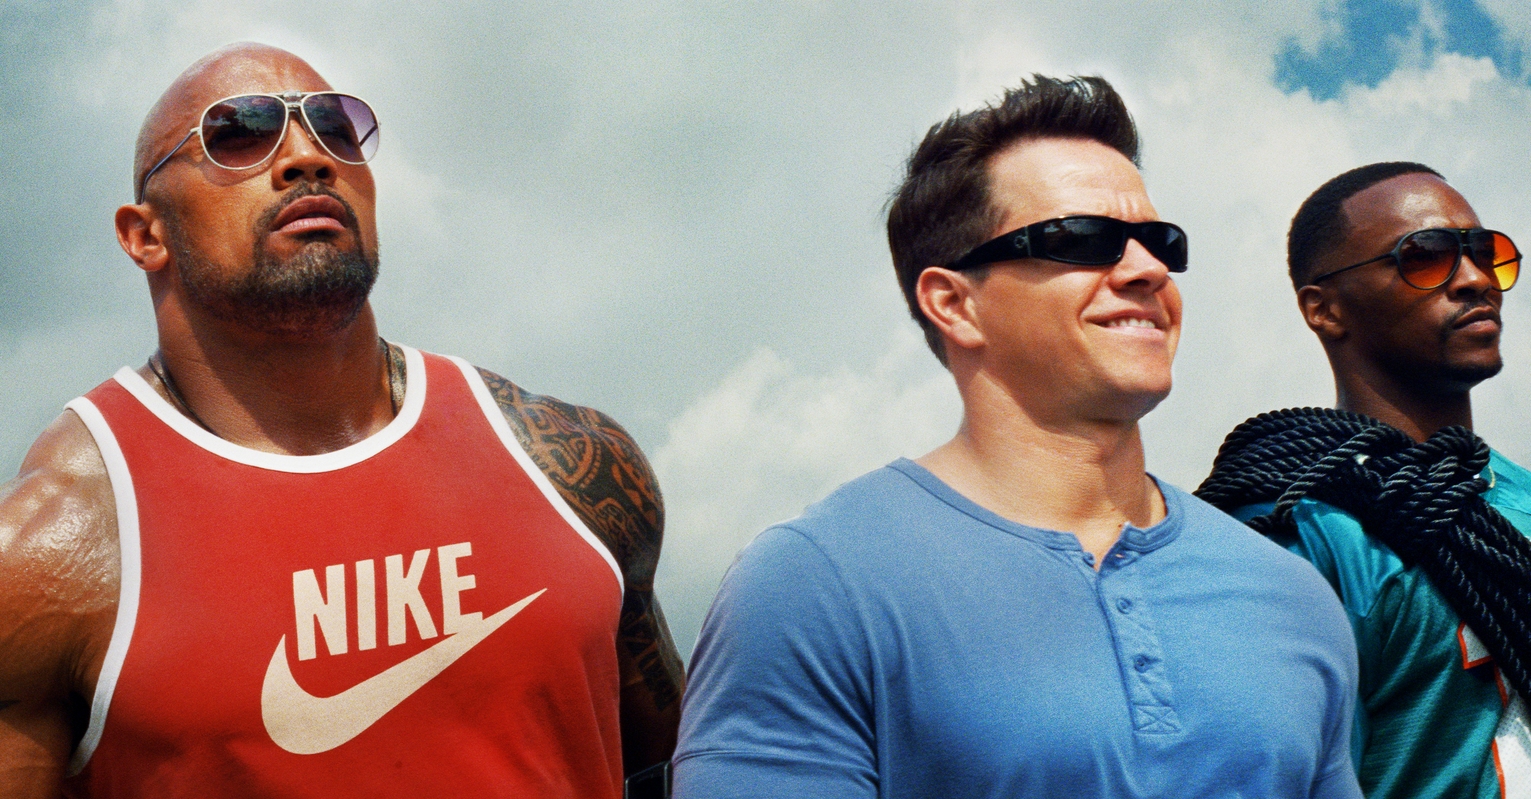 Pain and Gain - movie review